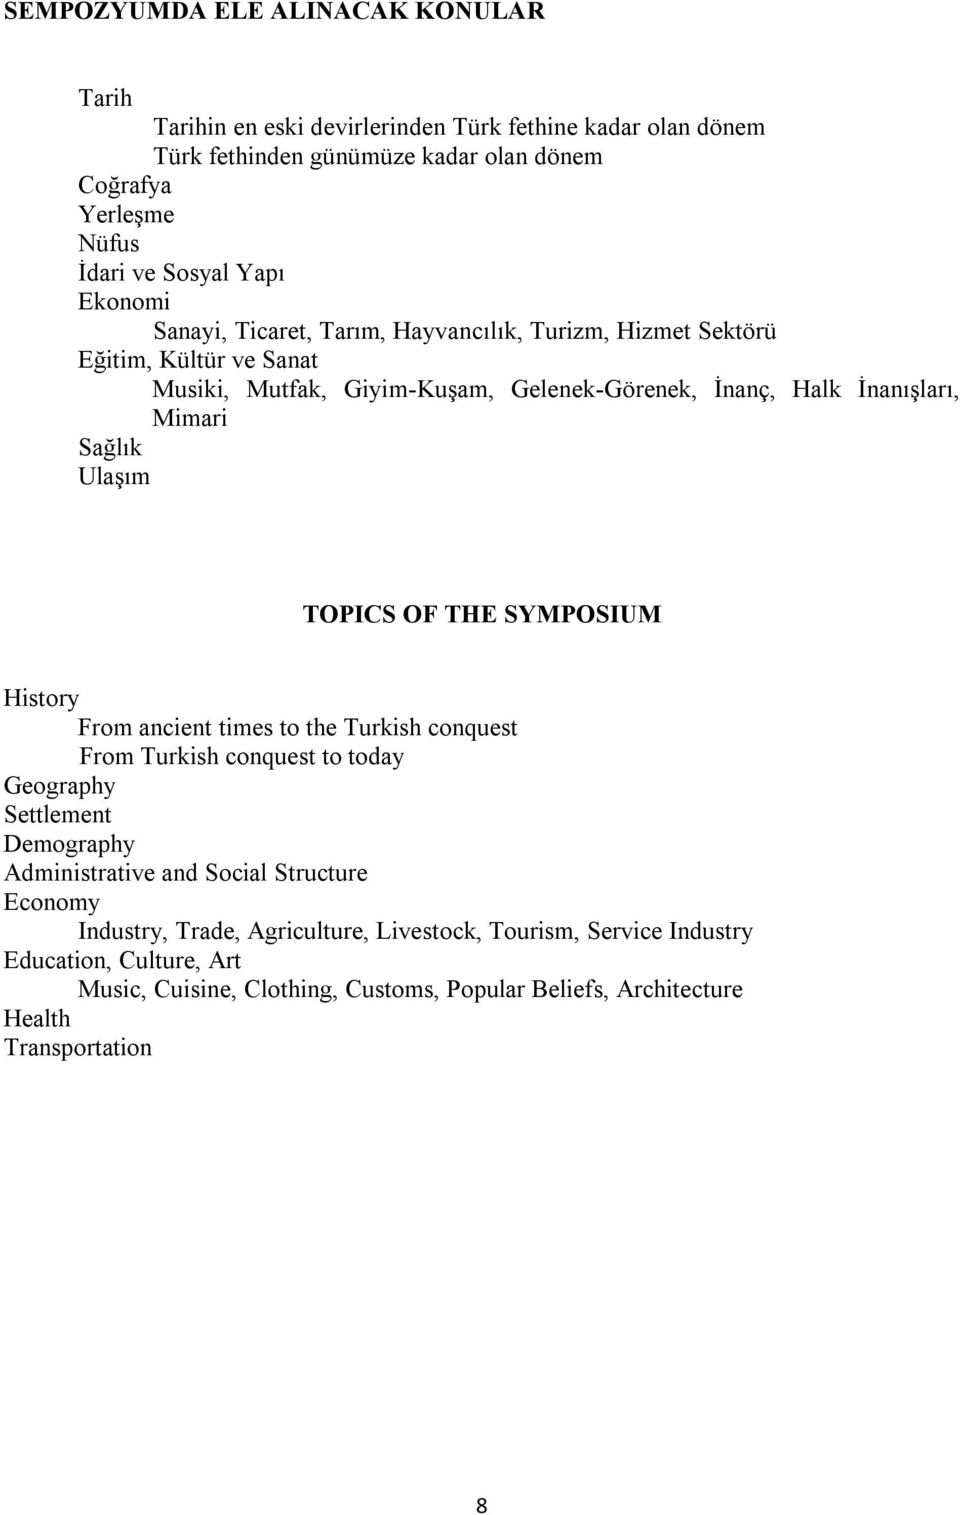 Ulaşım TOPICS OF THE SYMPOSIUM History From ancient times to the Turkish conquest From Turkish conquest to today Geography Settlement Demography Administrative and Social Structure